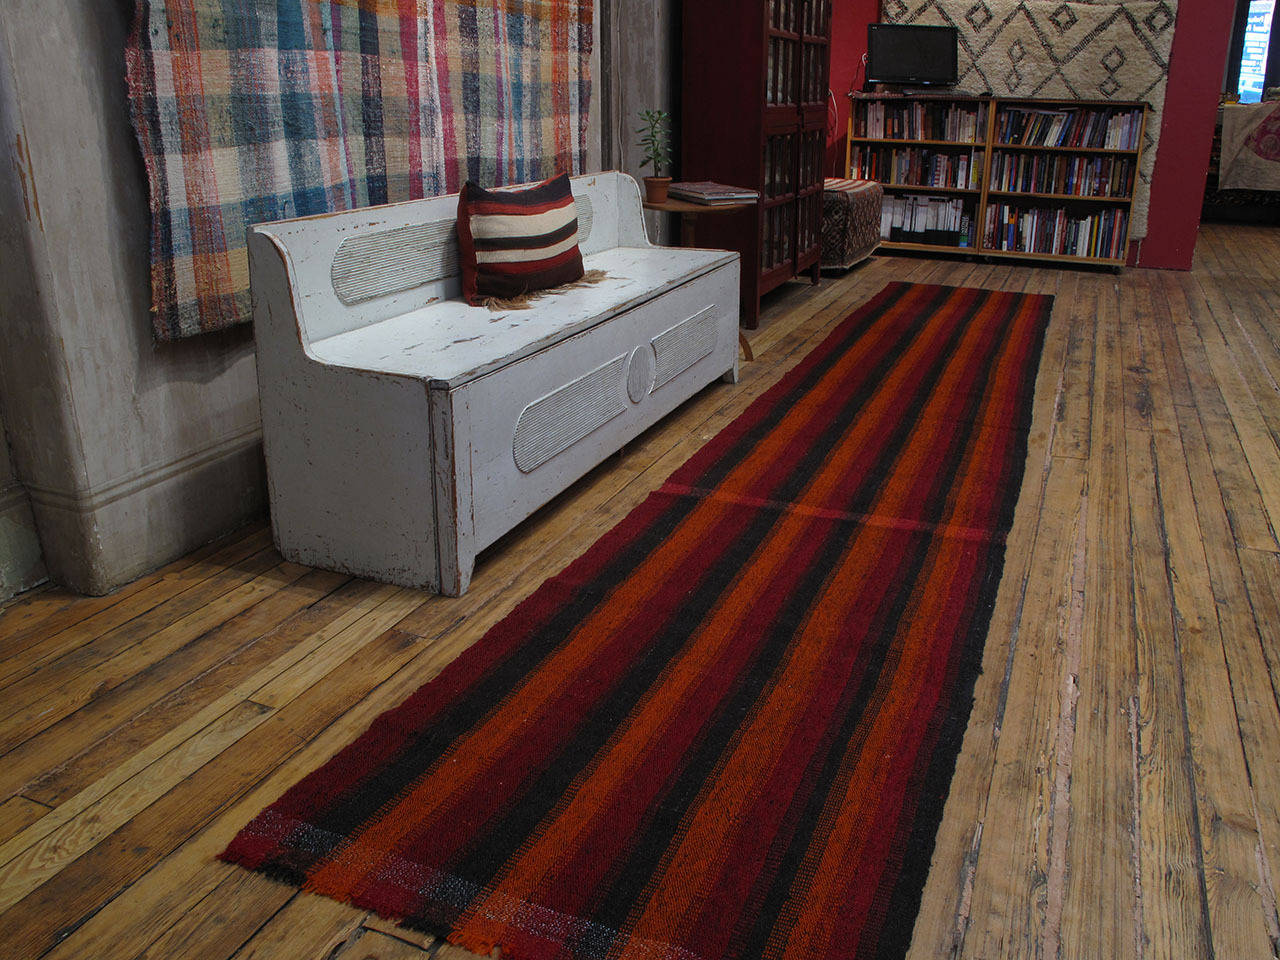 Pala Kilim runner rug. An old flat-weave runner rug from Turkey woven with an interesting and ingenious mixture of cotton rag and goat hair to create a sturdy, everyday floor cover. These runners are usually cut in half and made into two panel rugs